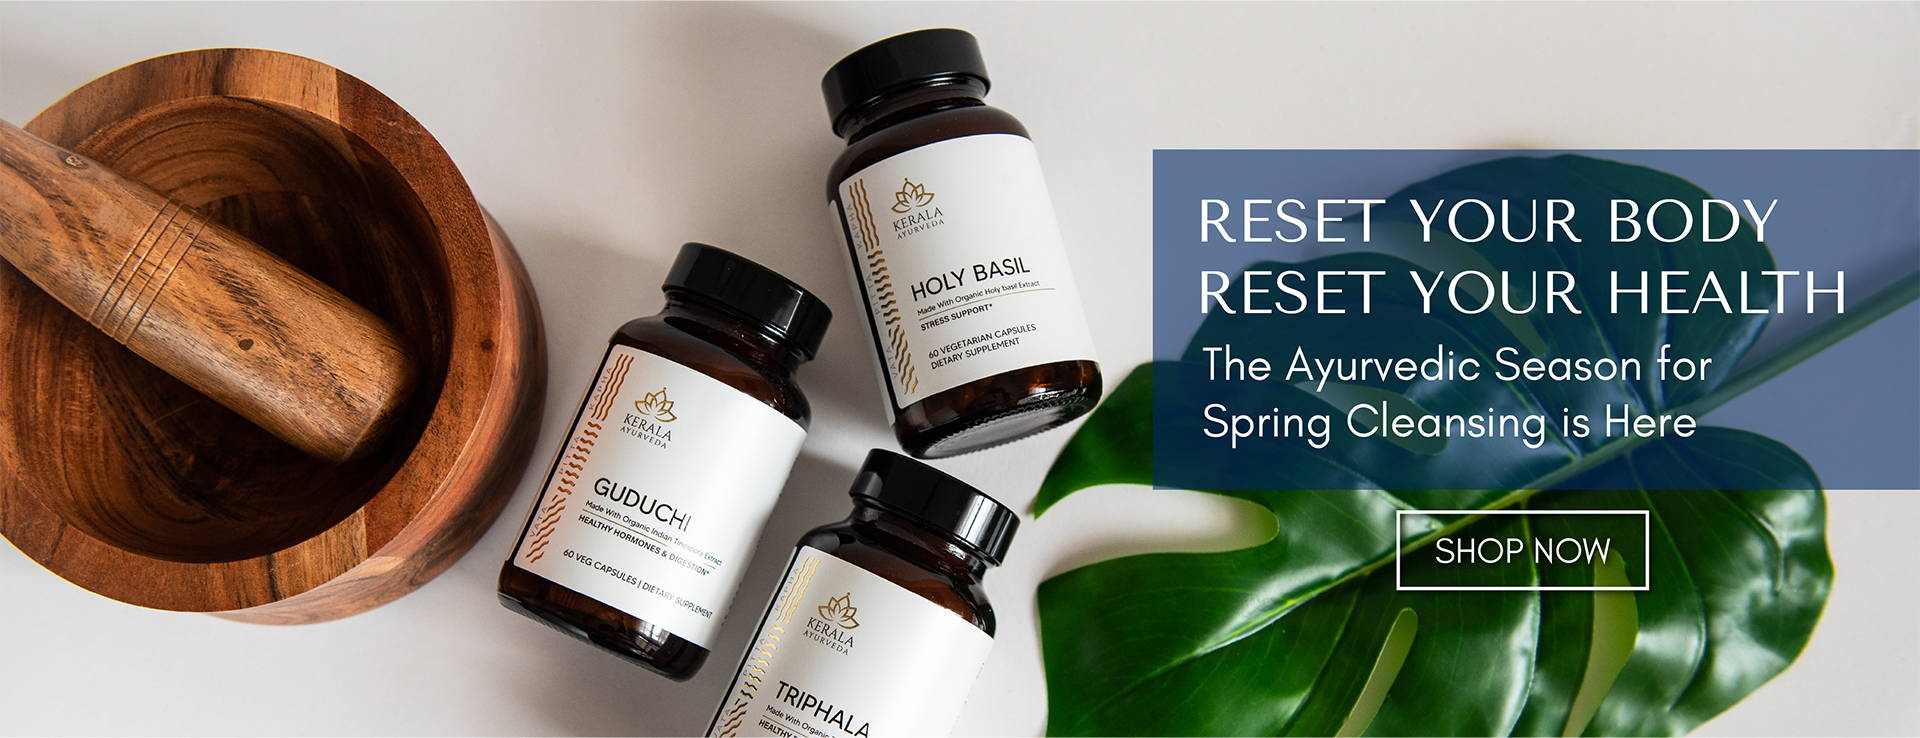 Reset Your Body. Reset Your Health. Shop Now.